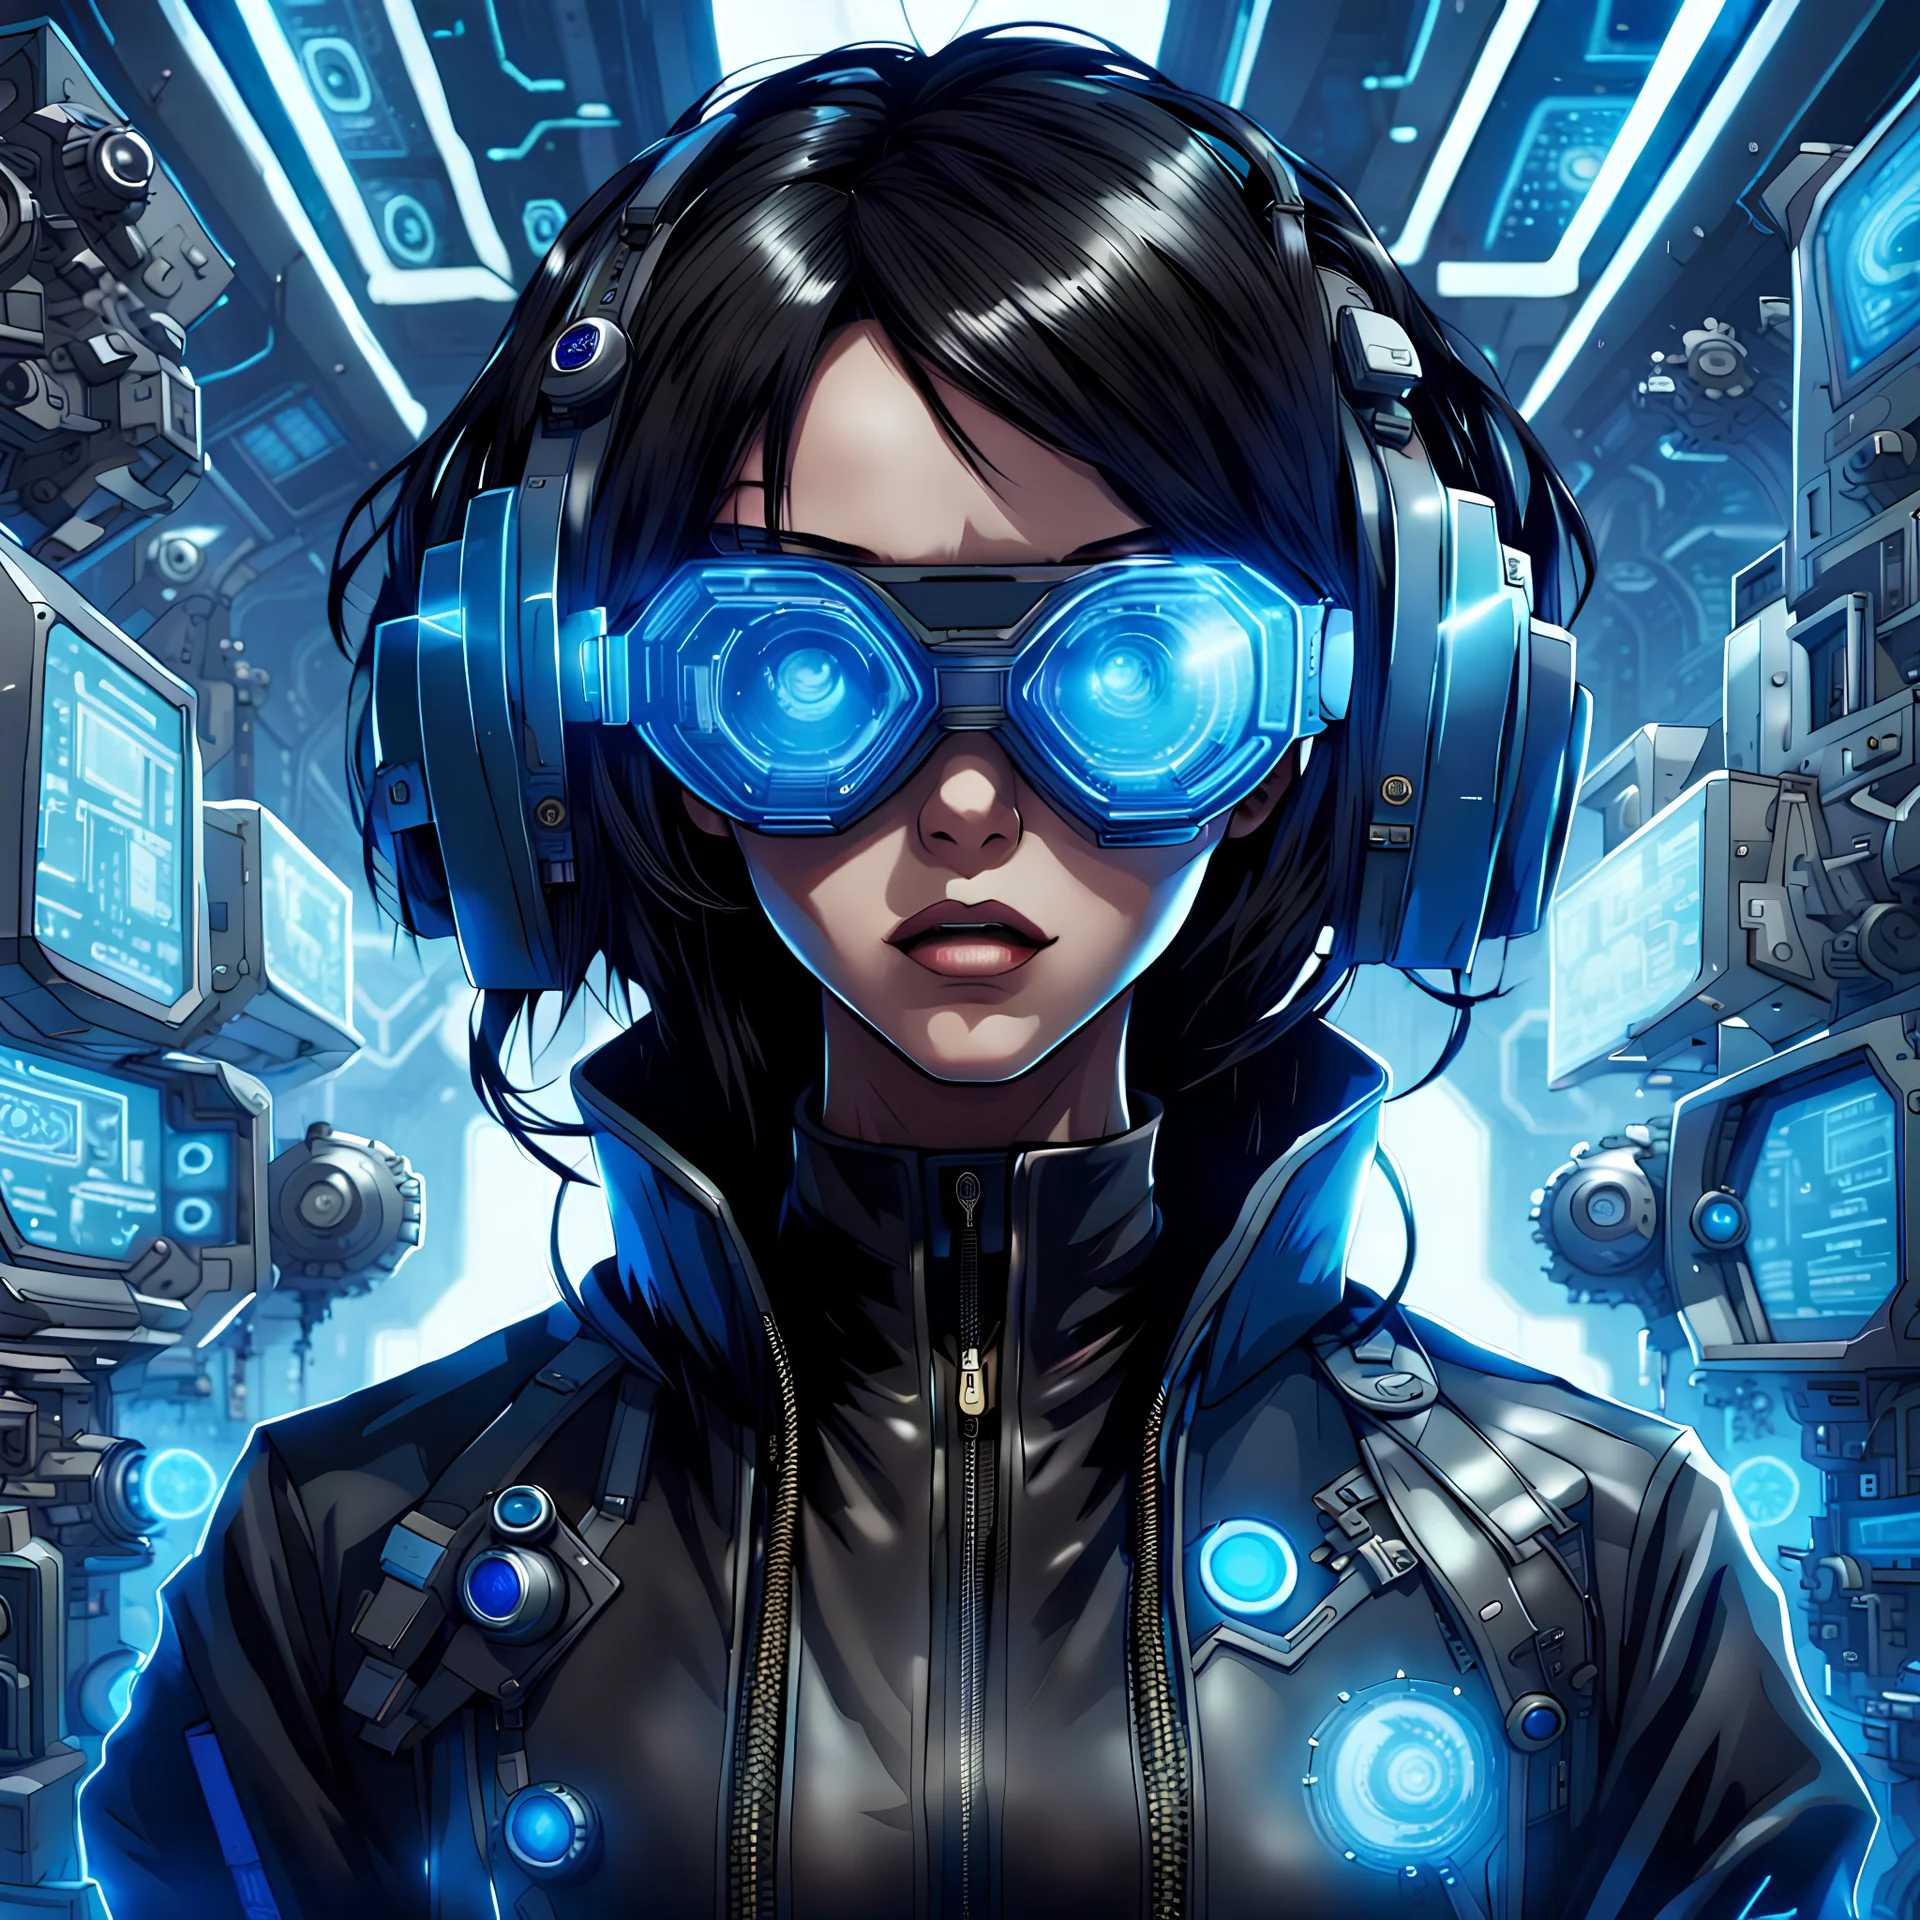 Choctaw hacker, slim pretty face, black hair, black jacket, blue-tinted goggles, hi-tech, futuristic, sci-fi, surrounded by her inventions, anime style